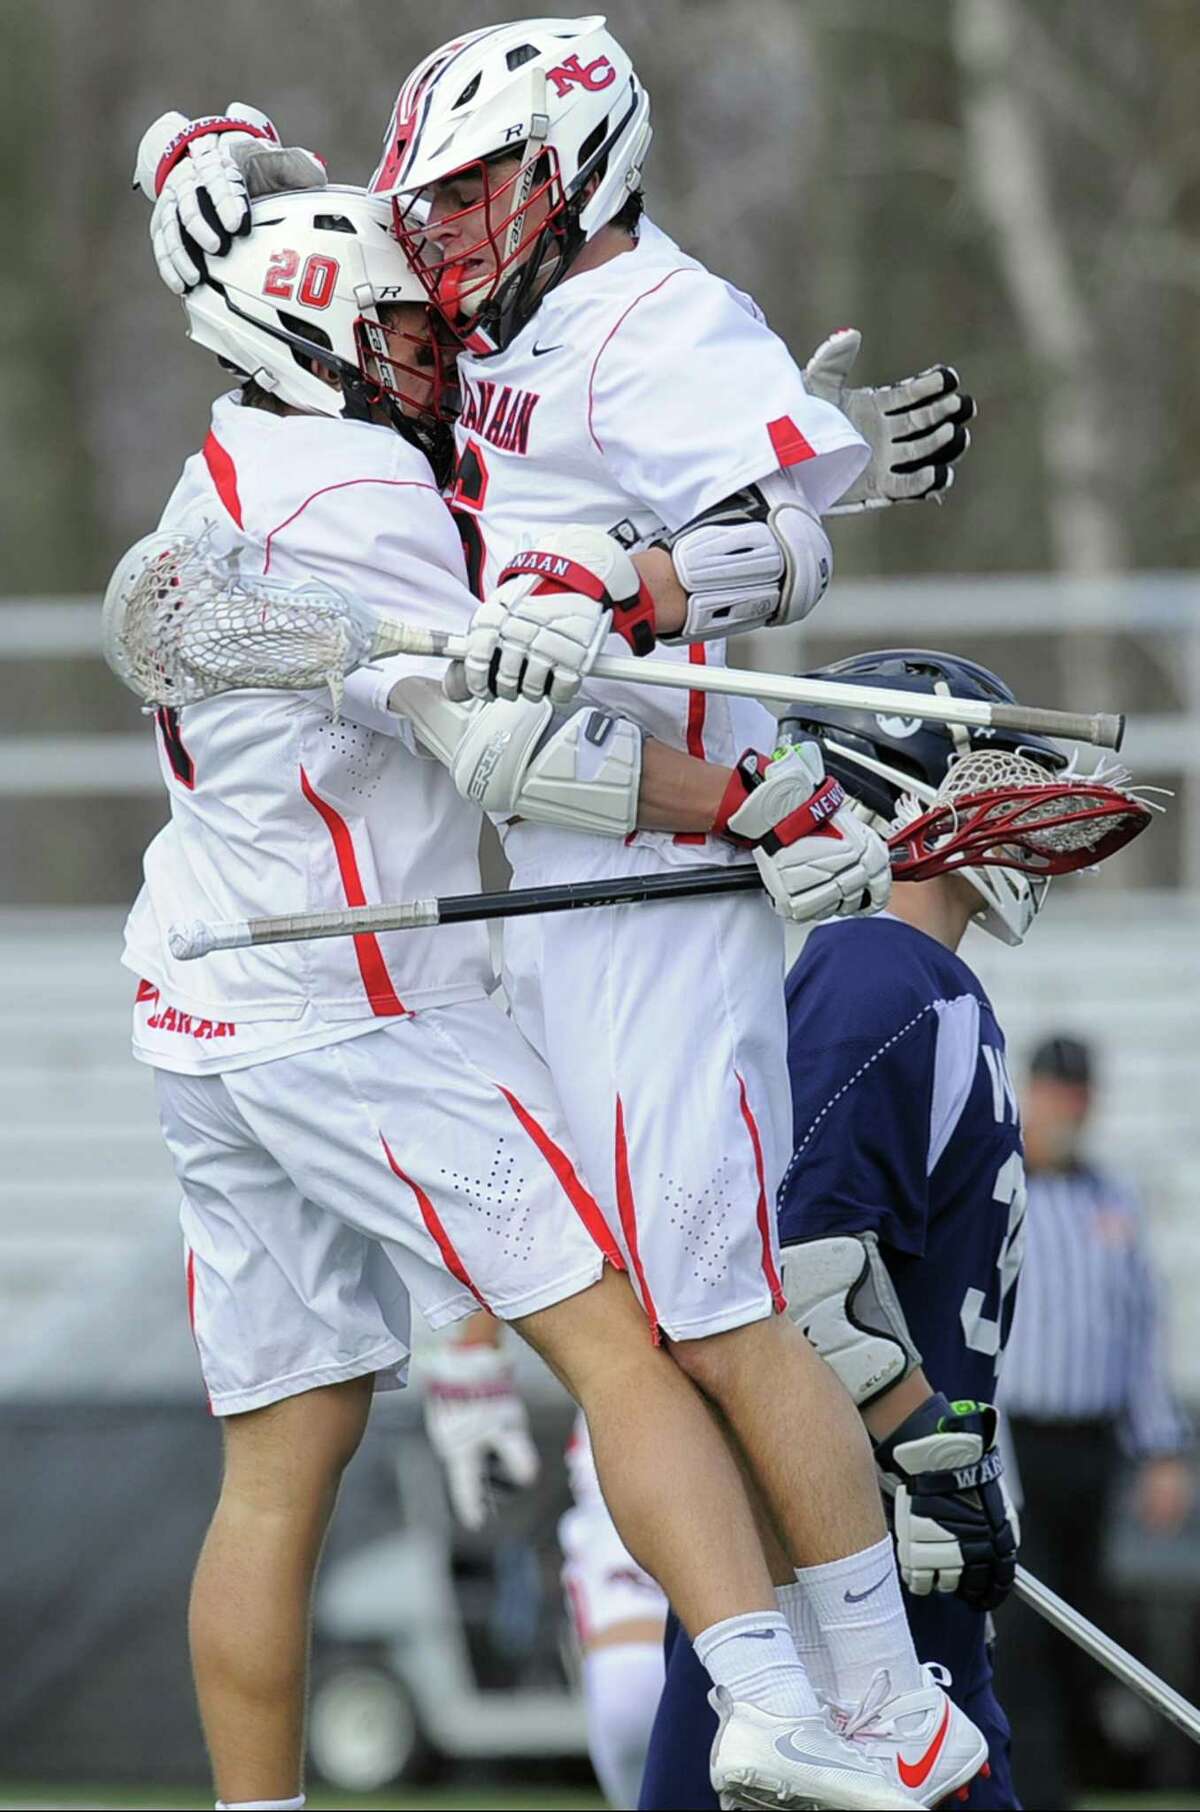 New Canaan Quintin O'Connell celebrates with his brother Ryan O'Connell after Ryan scored in the first half against Wilton of a boys lacrosse match at New Canaan High School Dunning Field on April 5, 2017. New Canaan defeated Wilton 9-8.